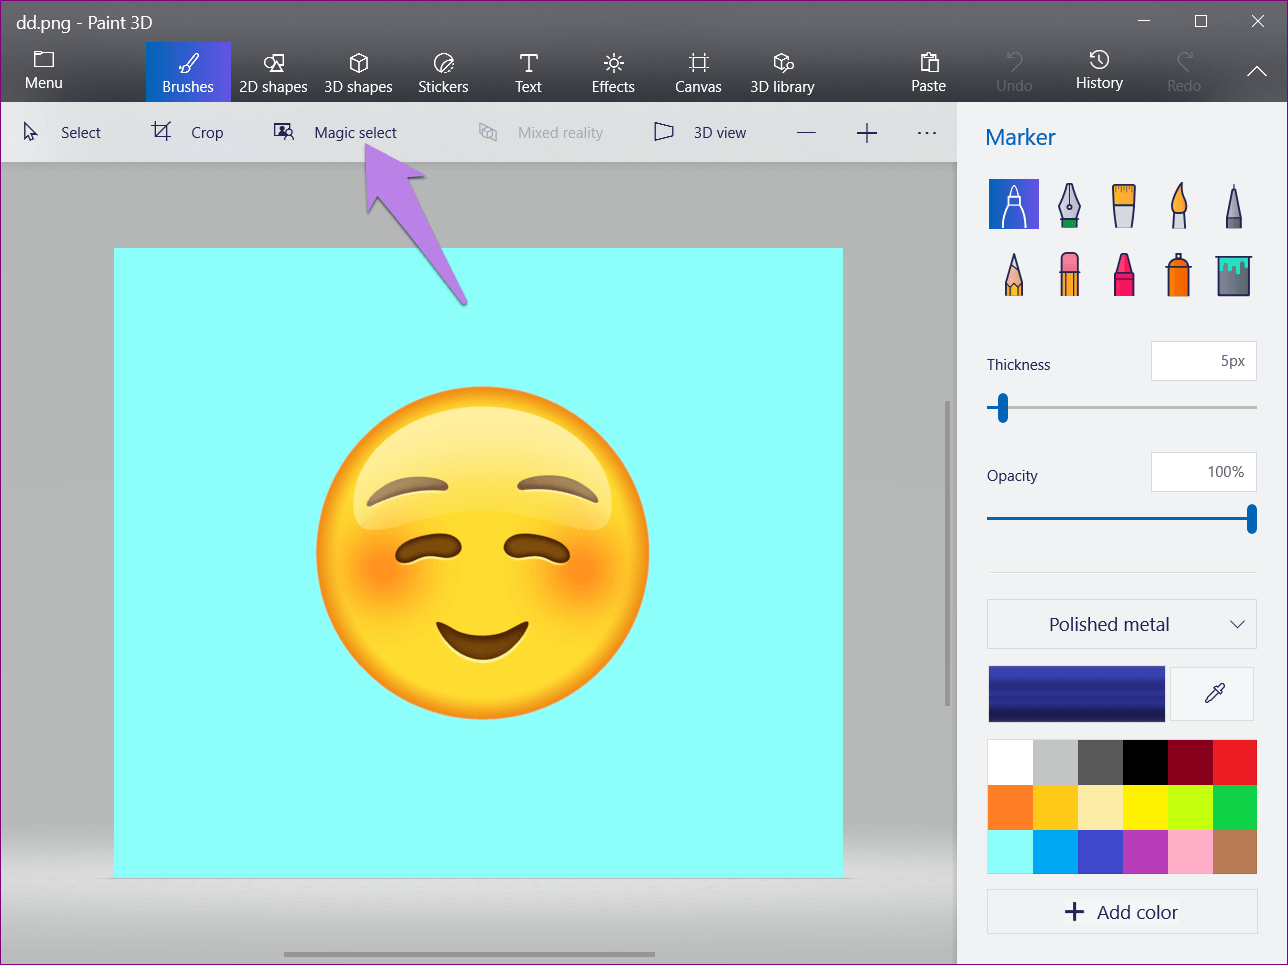 How to Make Background Transparent in Paint 3D.